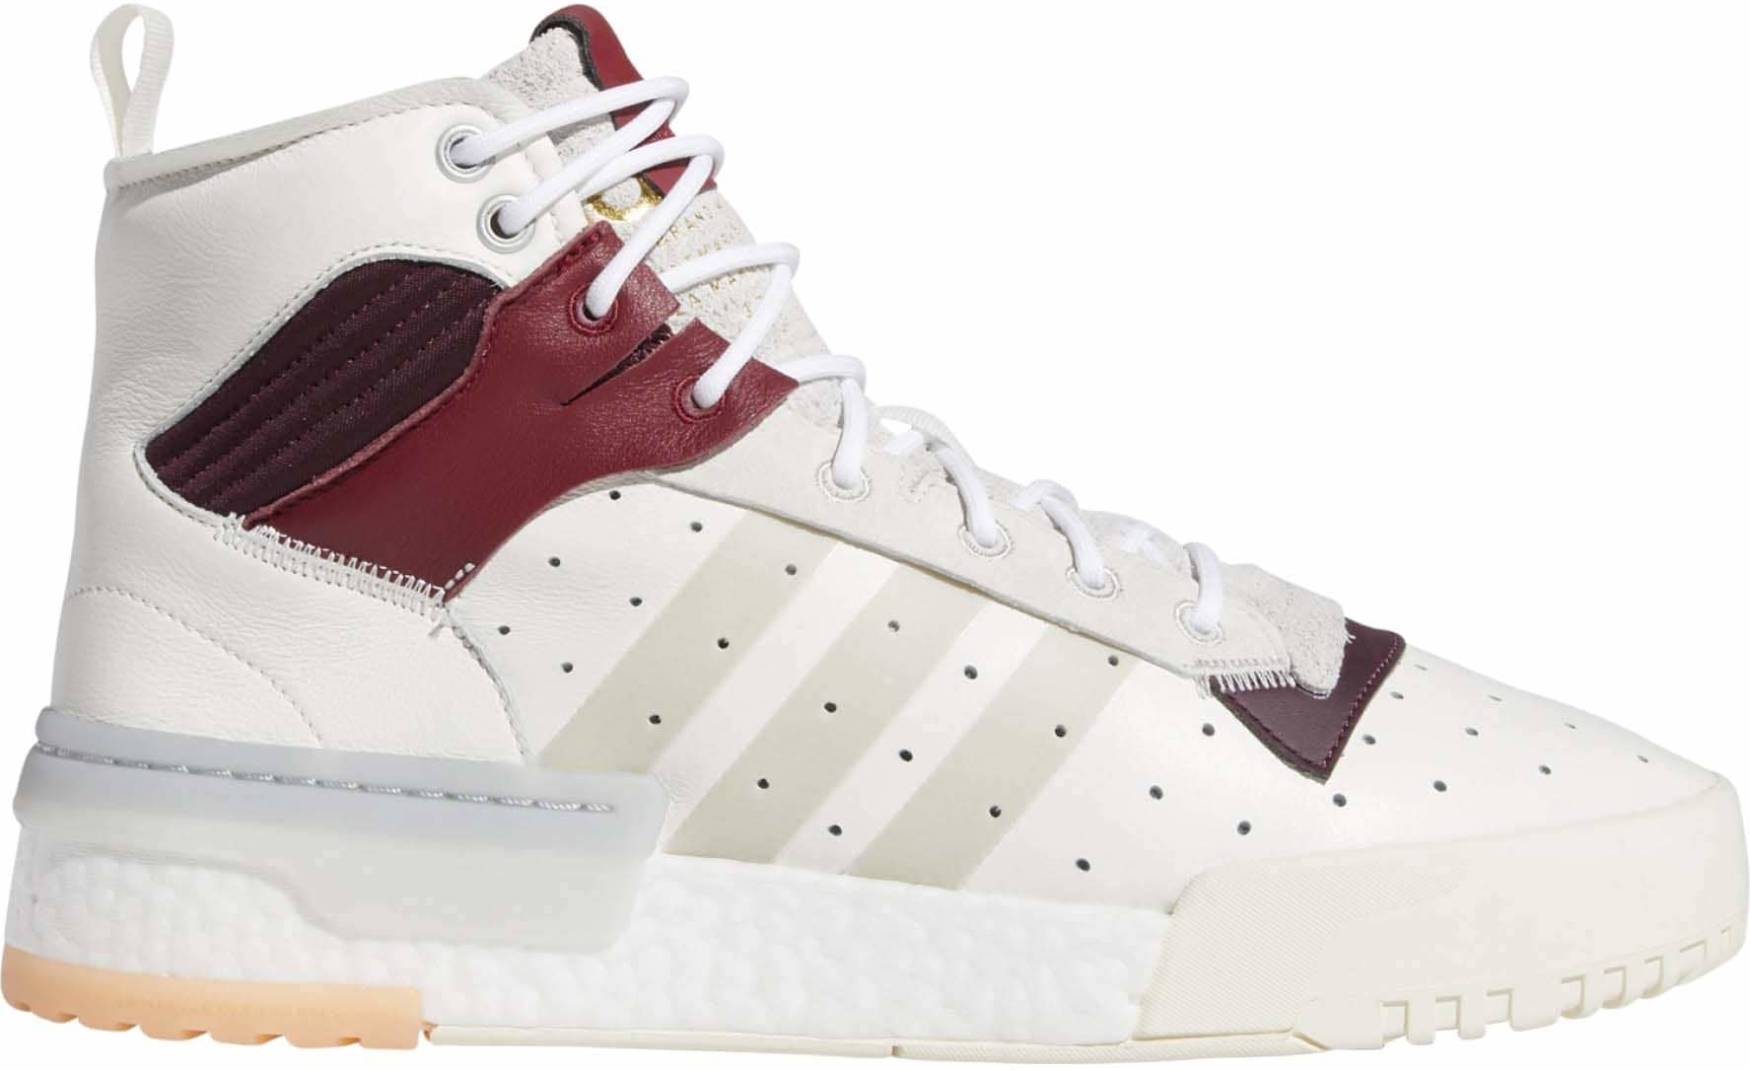 Adidas Rivalry RM sneakers in white 